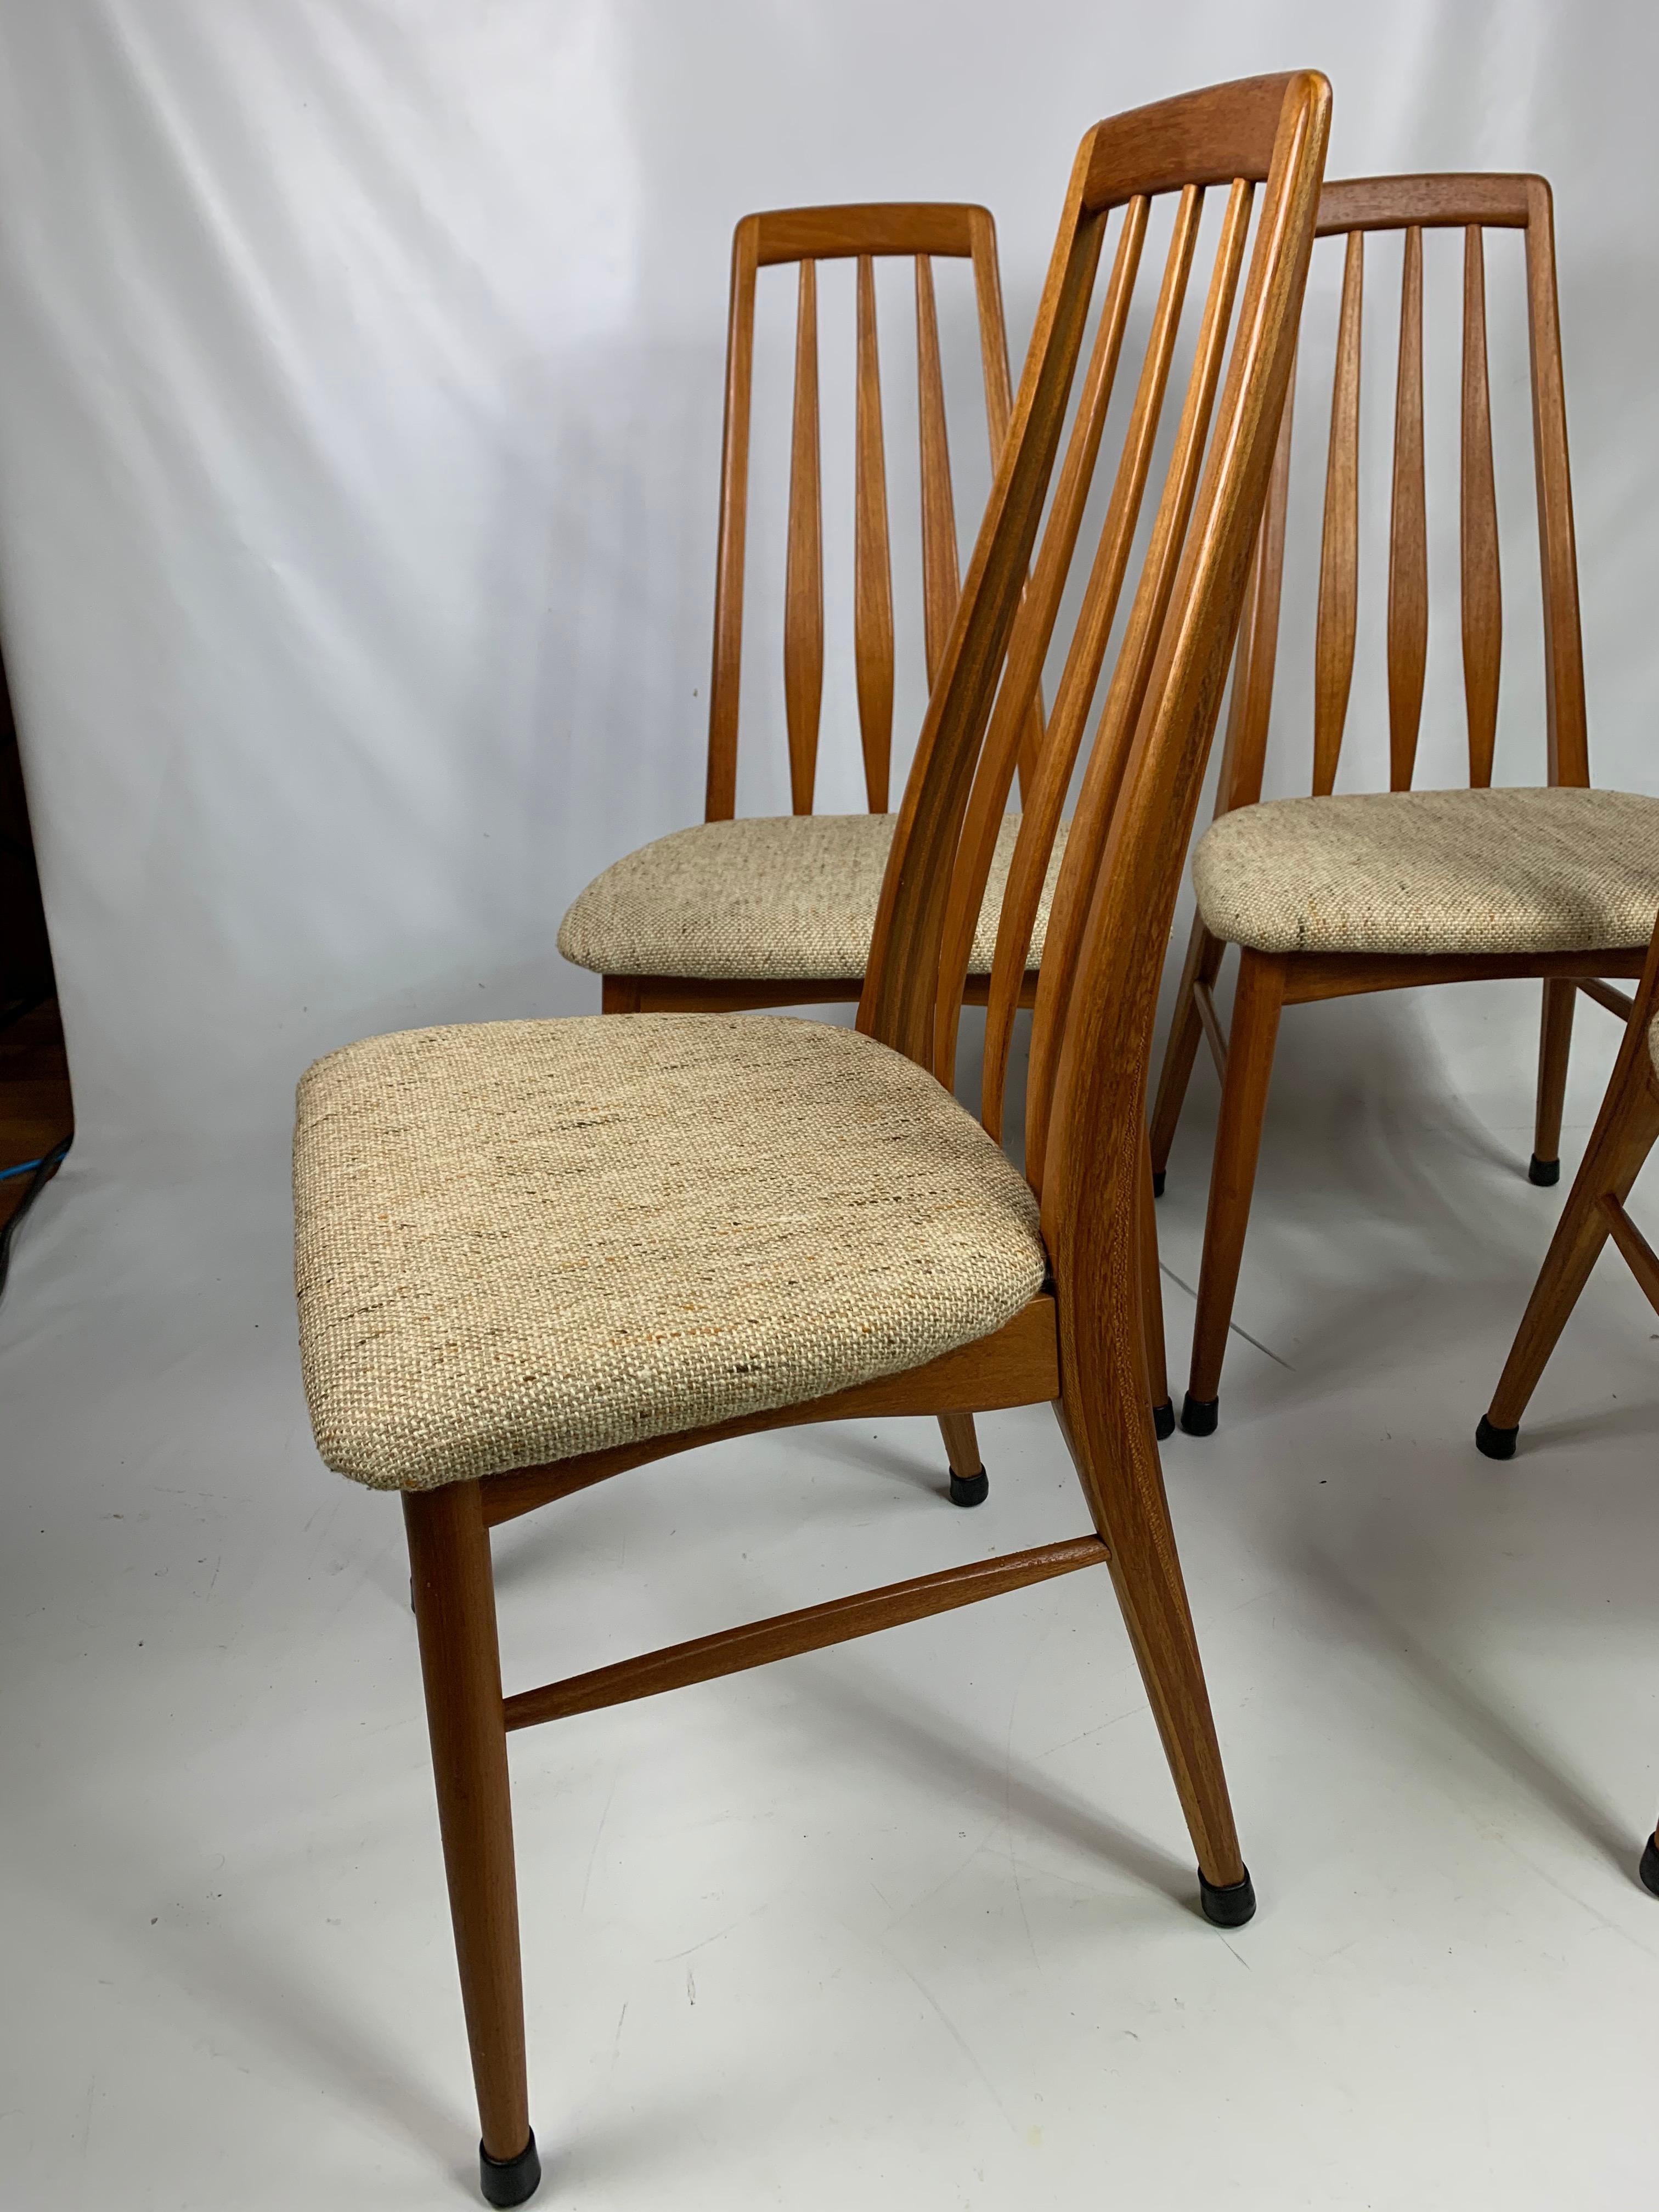 Gorgeous set of four, chairs are very clean and ready to use. Great lines.